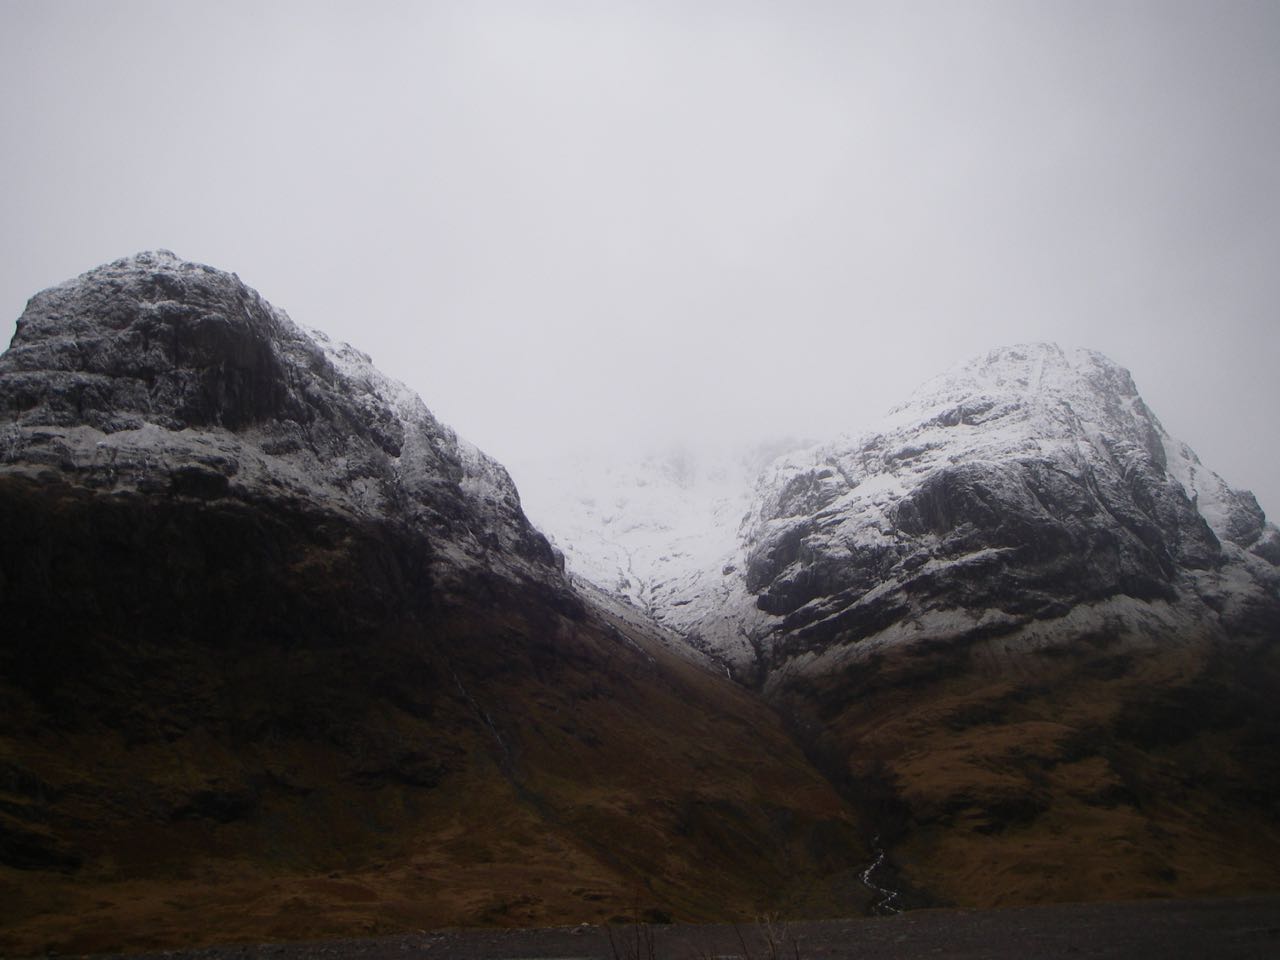 Not much of Stob Coire nan Lochan to see first thing